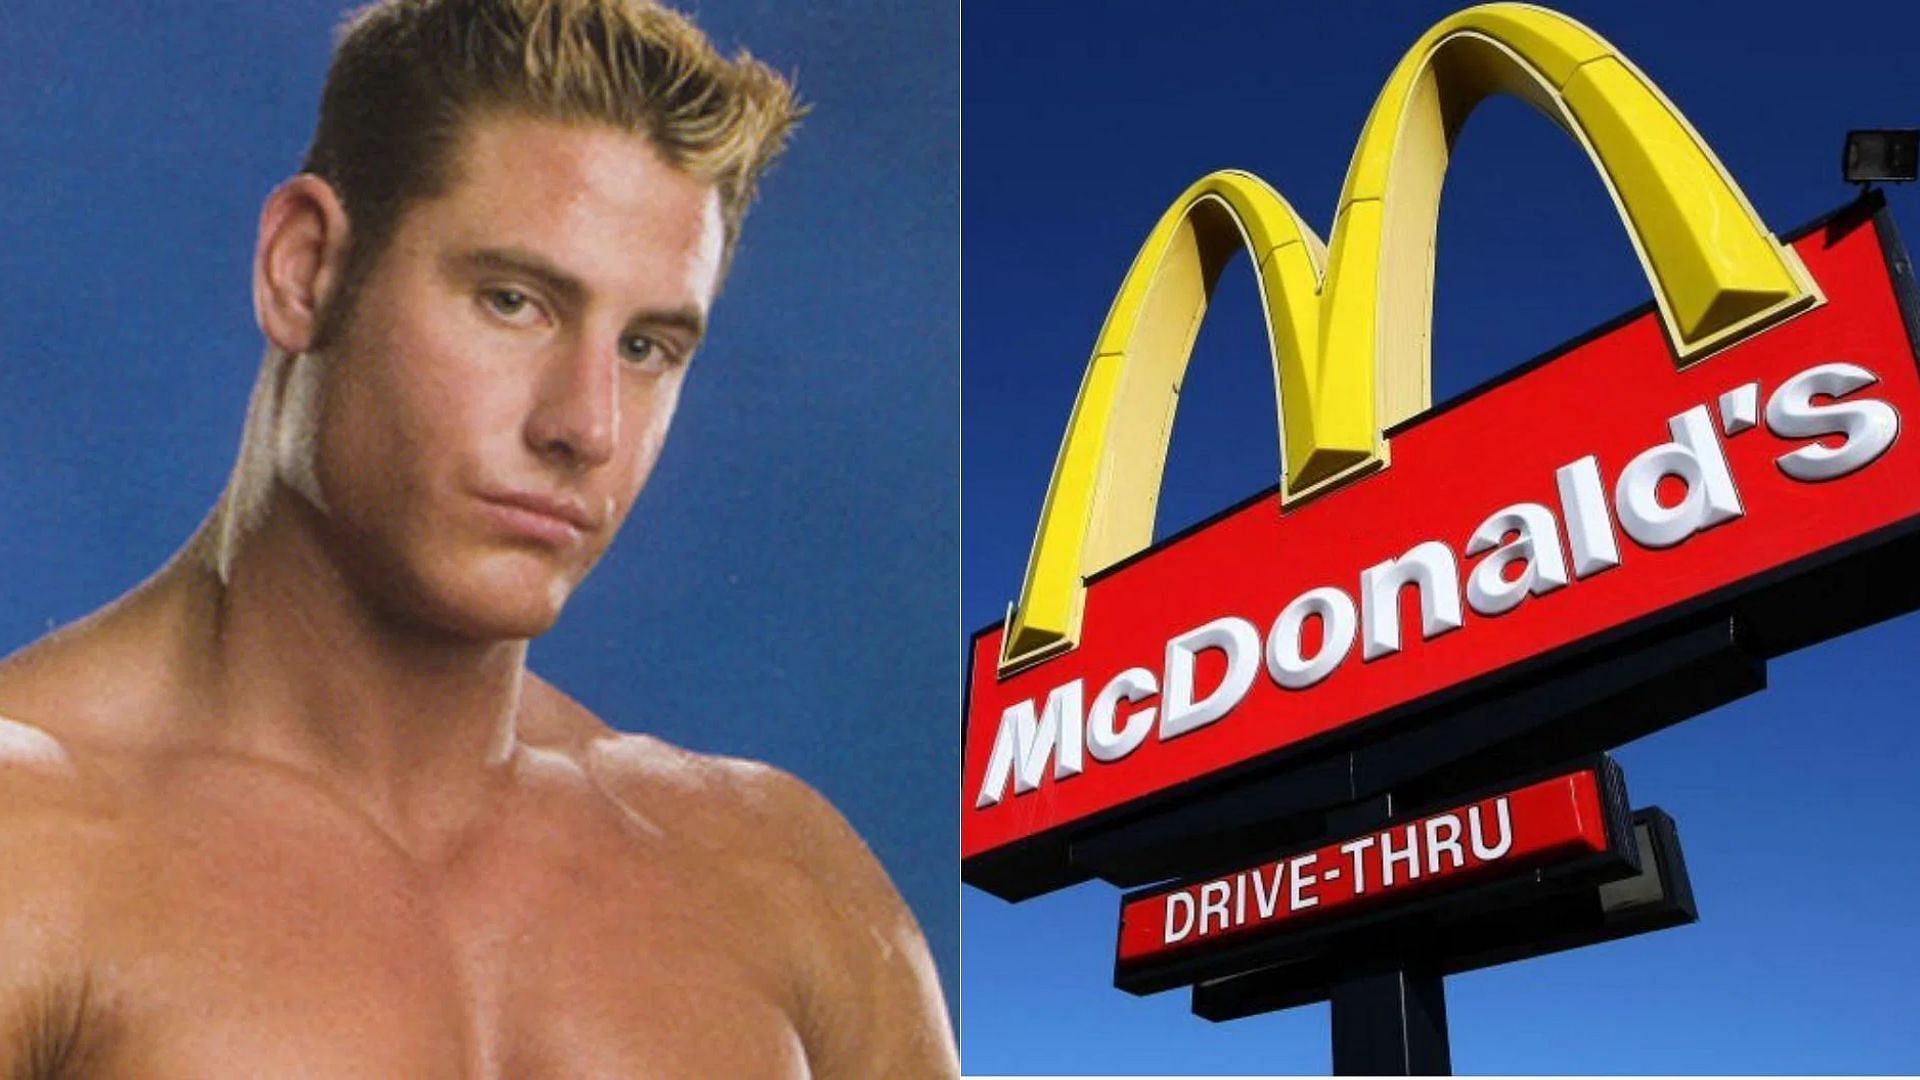 Rene Dupree (credit: WWE) and a McDonald&#039;s sign (credit: Justin Sullivan/Getty Images)